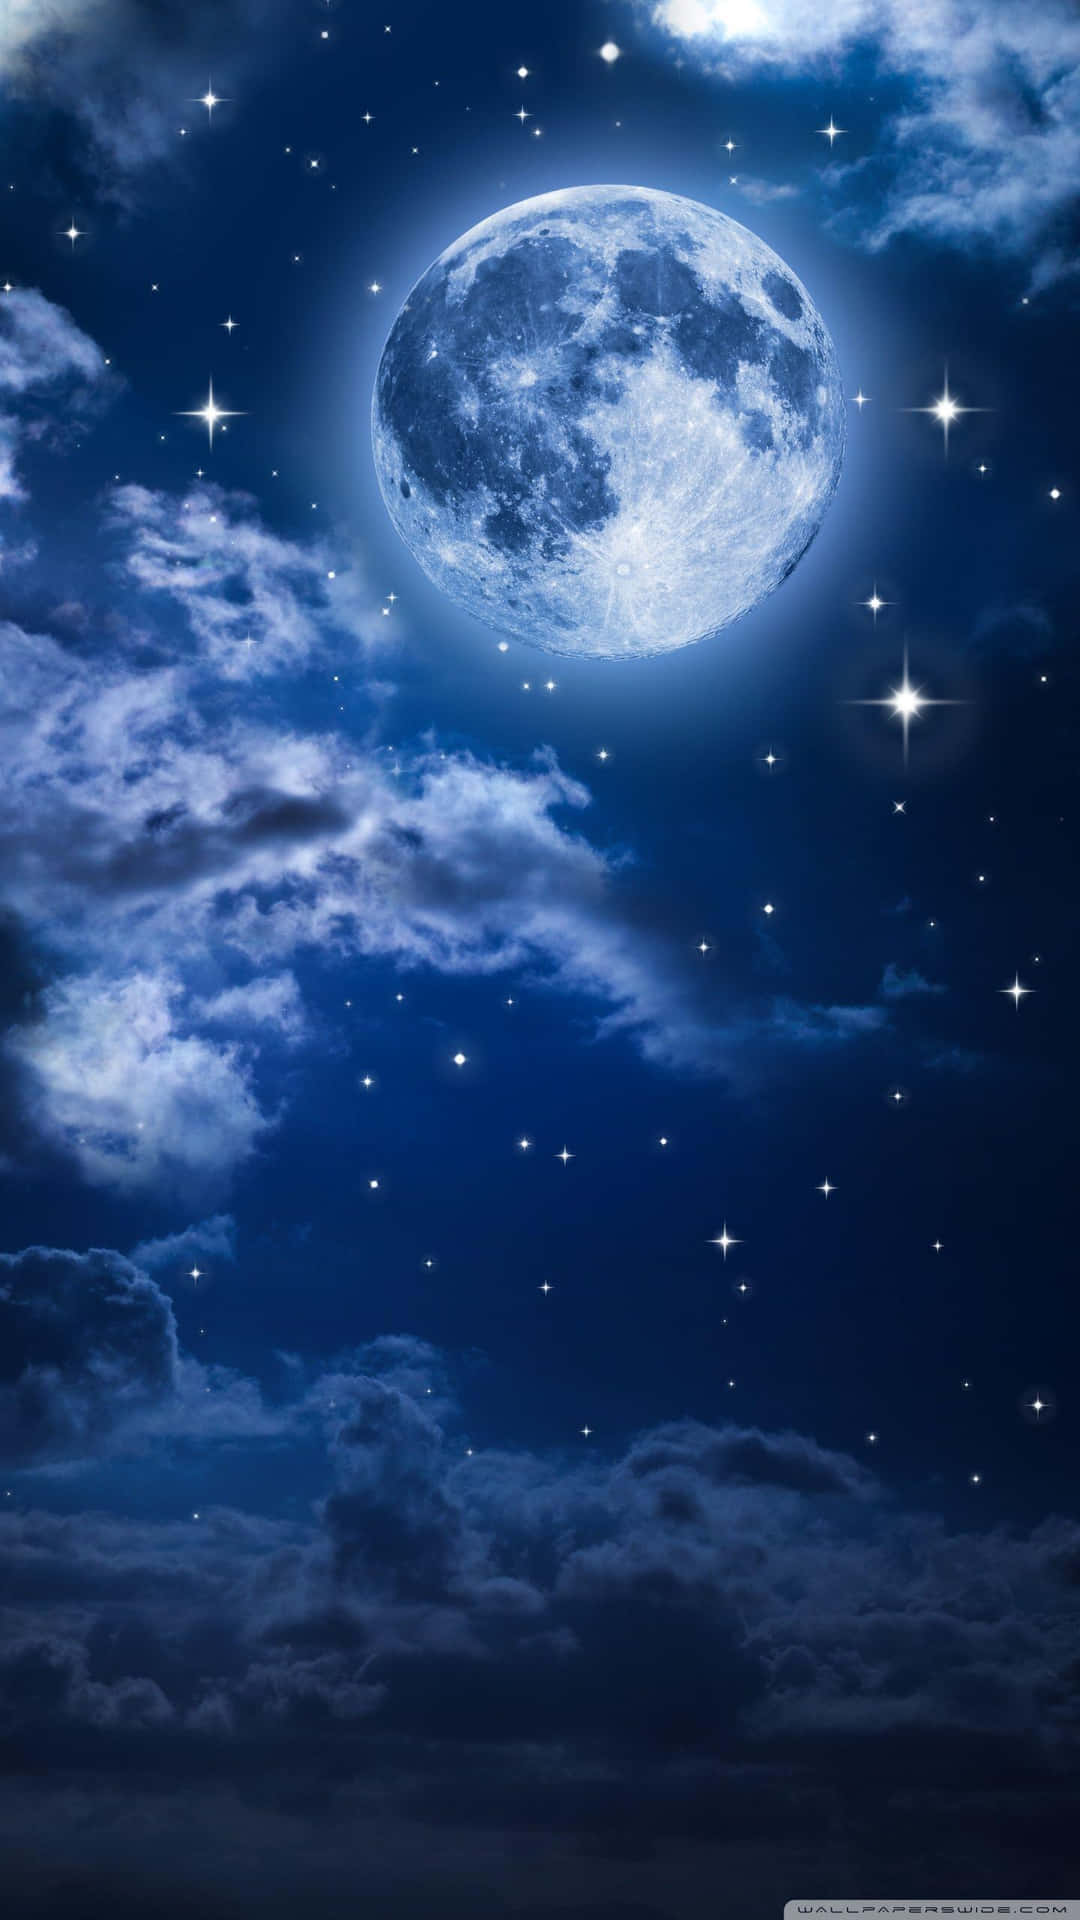 Admire the night sky with the Moonlight and Stars on your iPhone Wallpaper